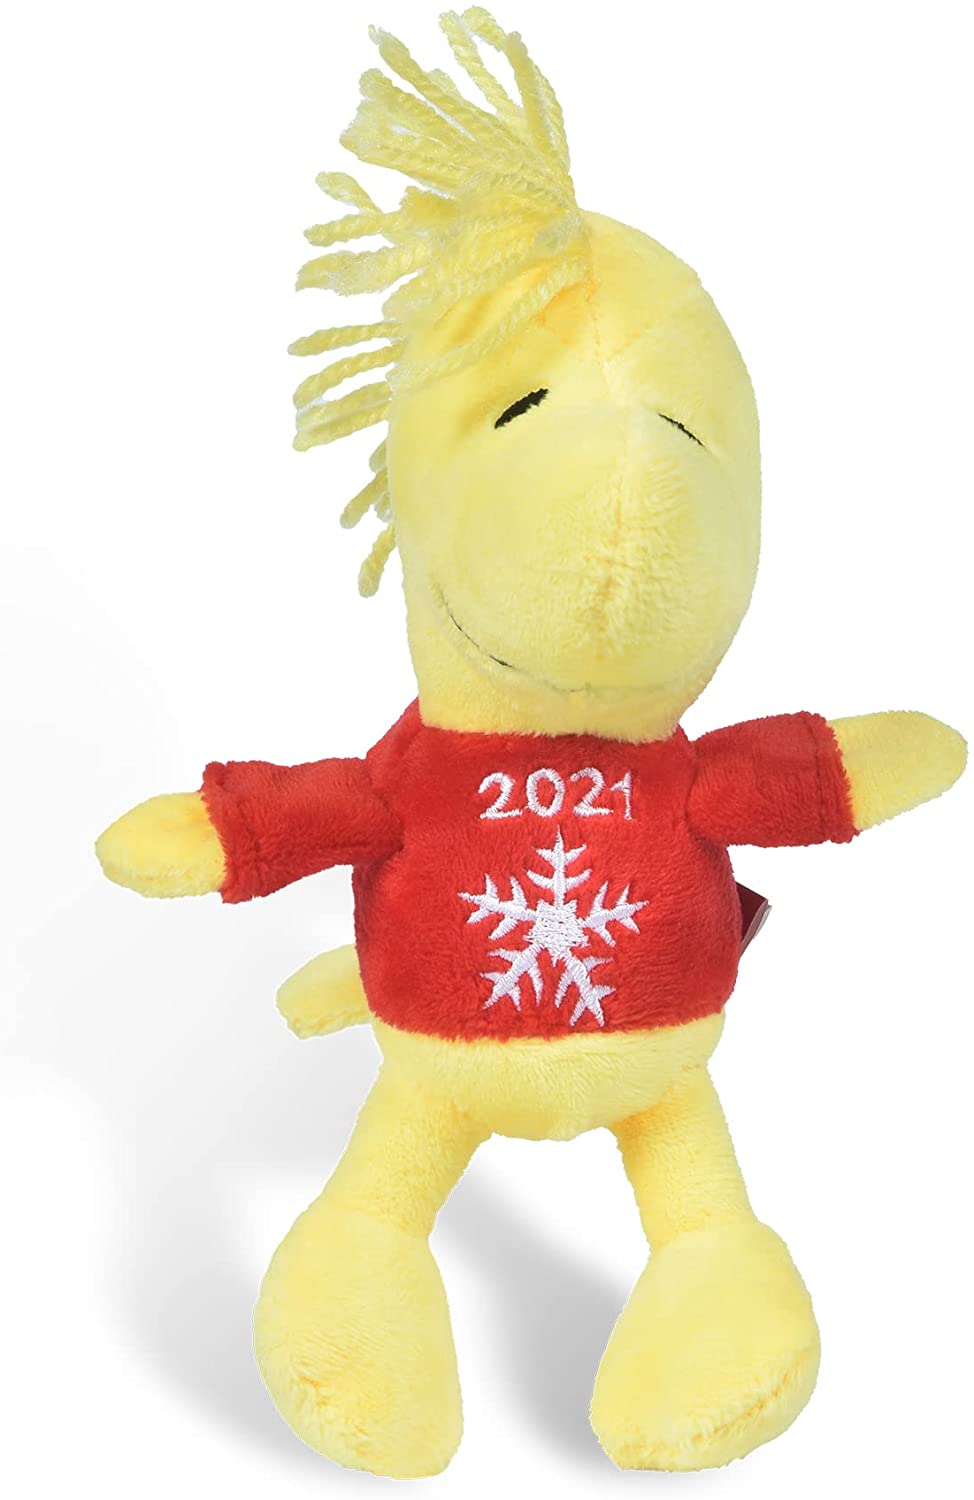 6" Peanuts for Pets Holiday Plush Toys for Dogs (Woodstock 2021) $1.50 + Free S&H w/ Prime or $25+